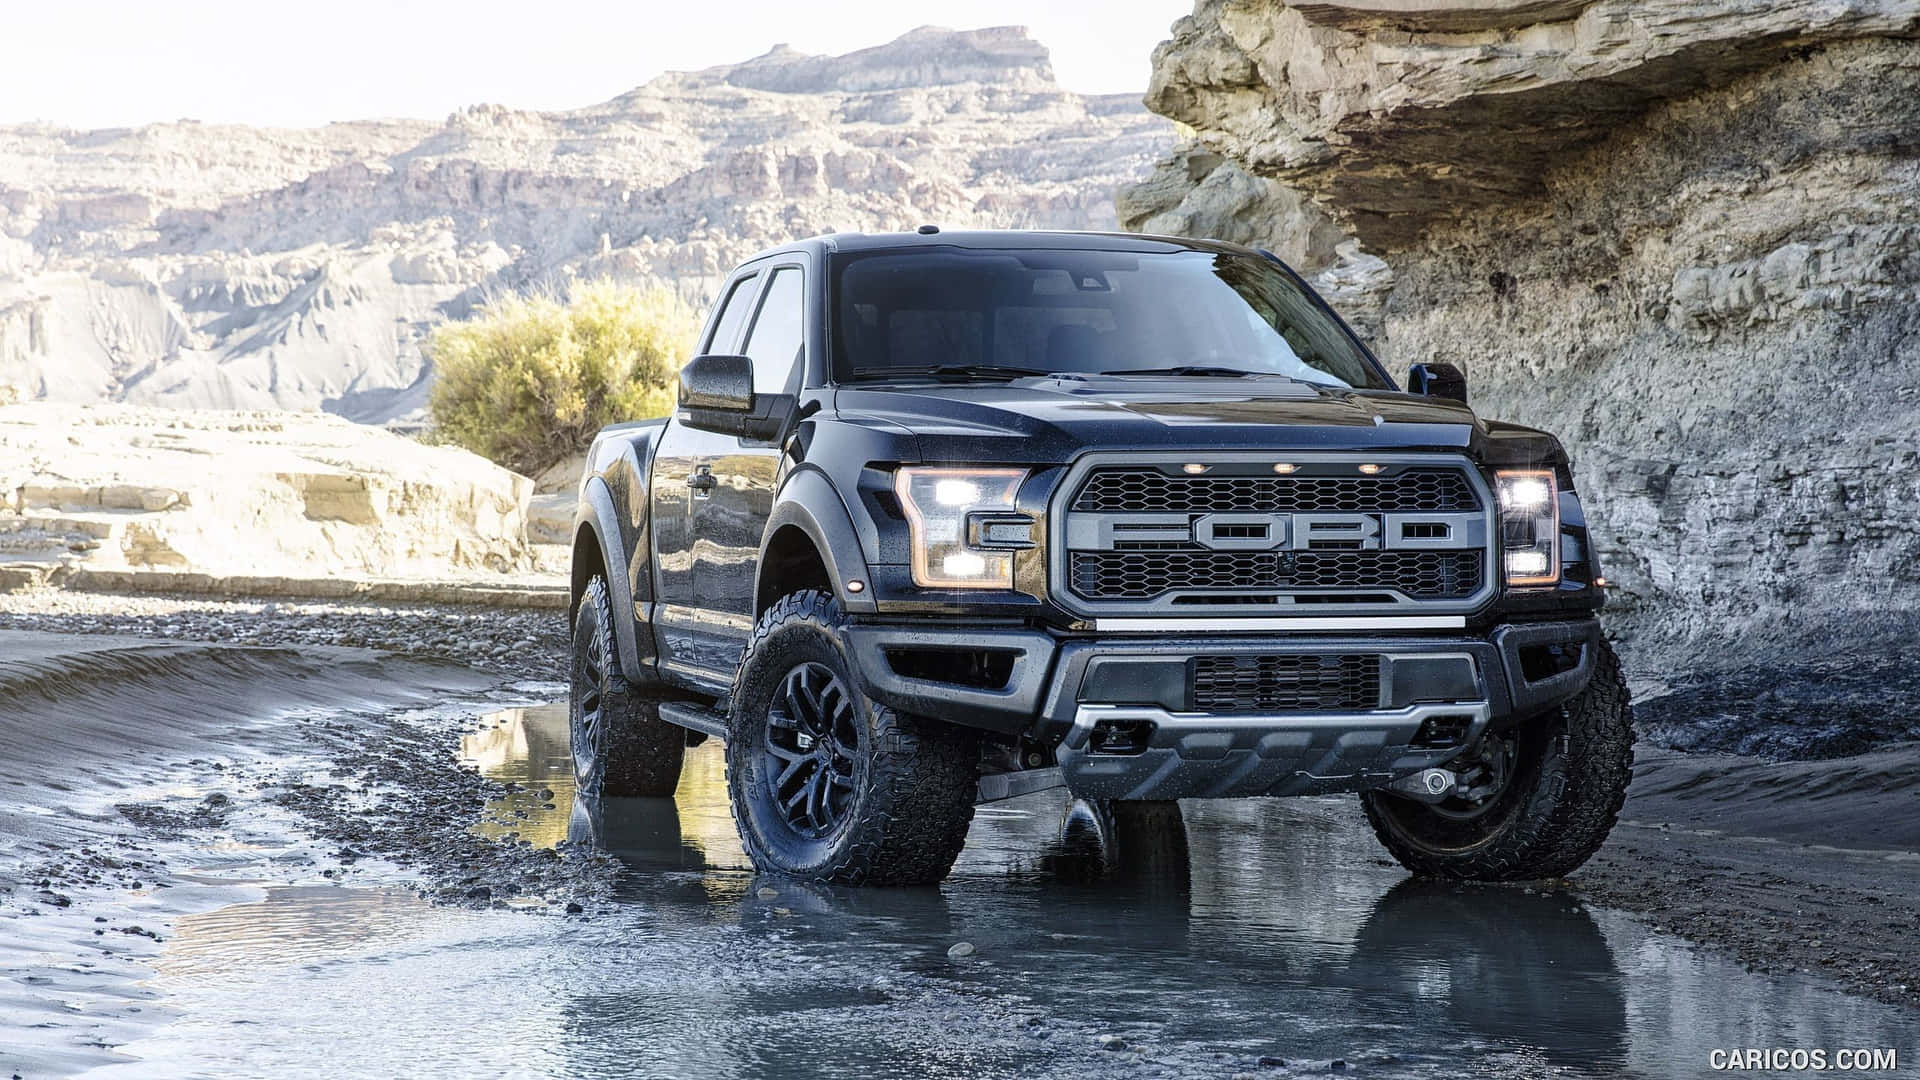 Powerful Ford Truck Wallpaper